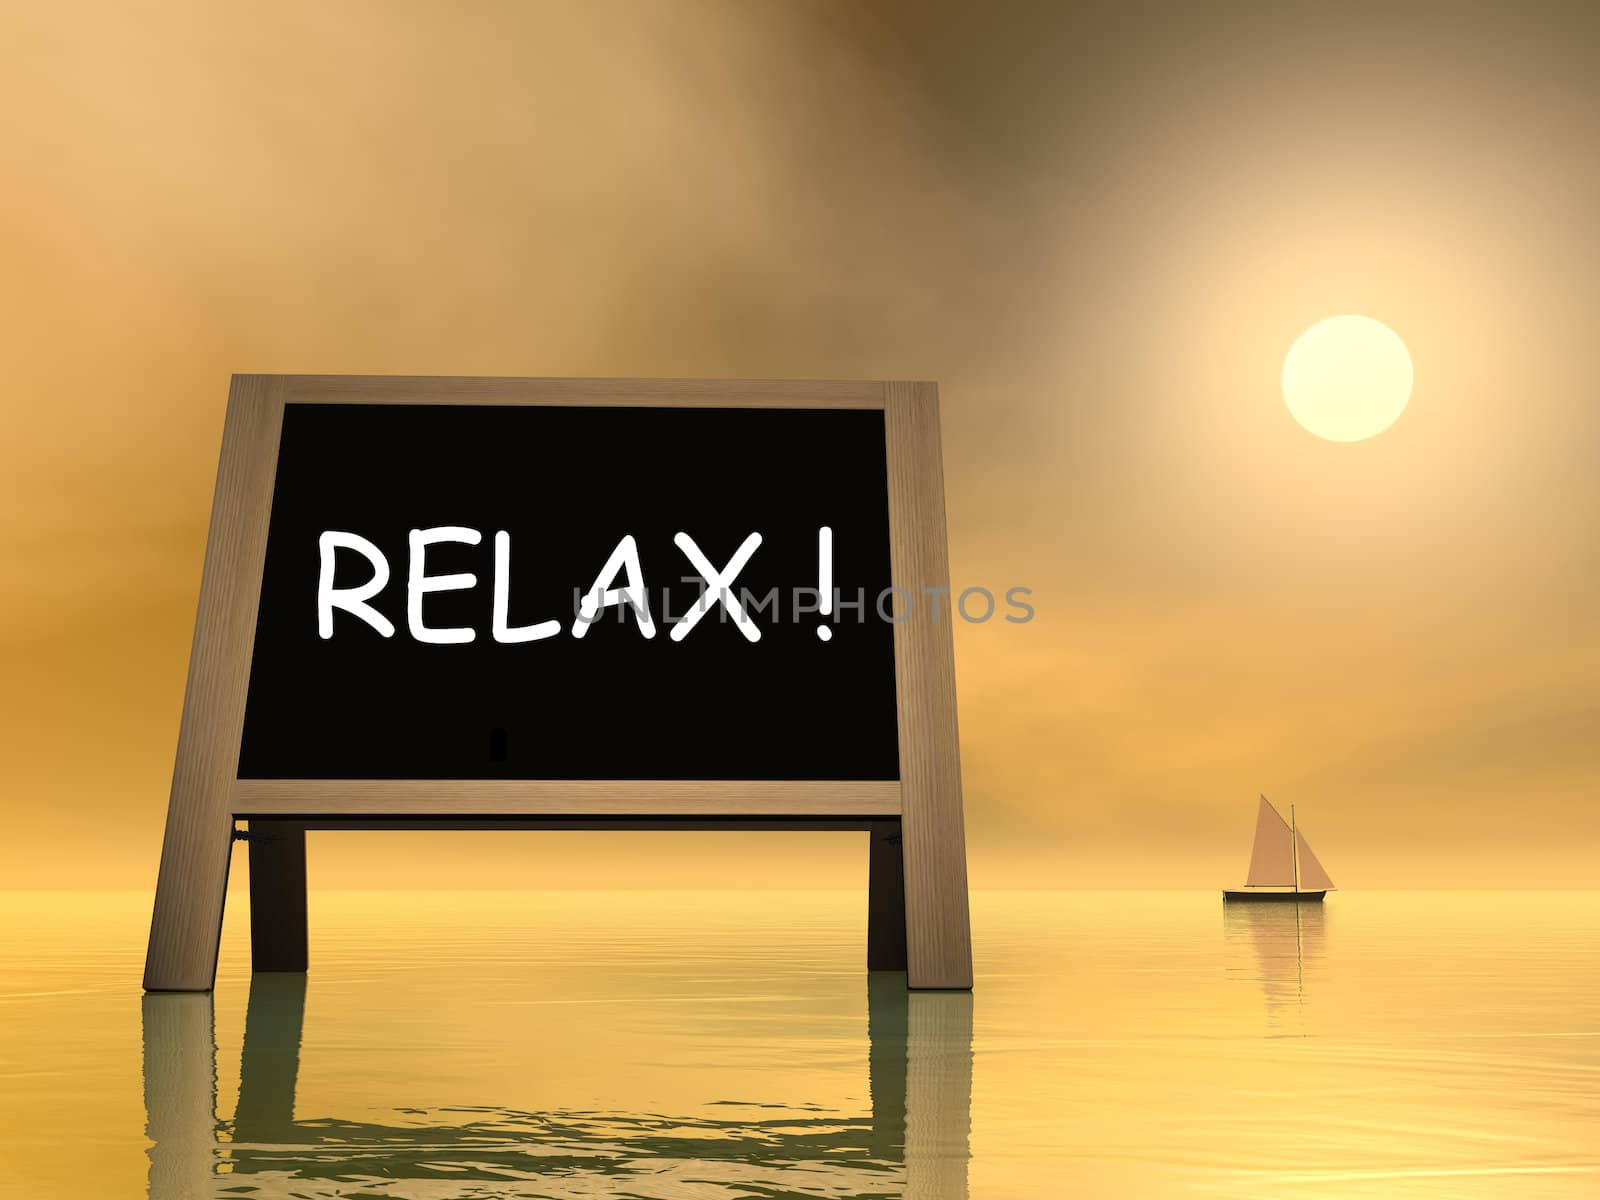 Relax message on blackboard upon water with sailing boat in the background by sunset